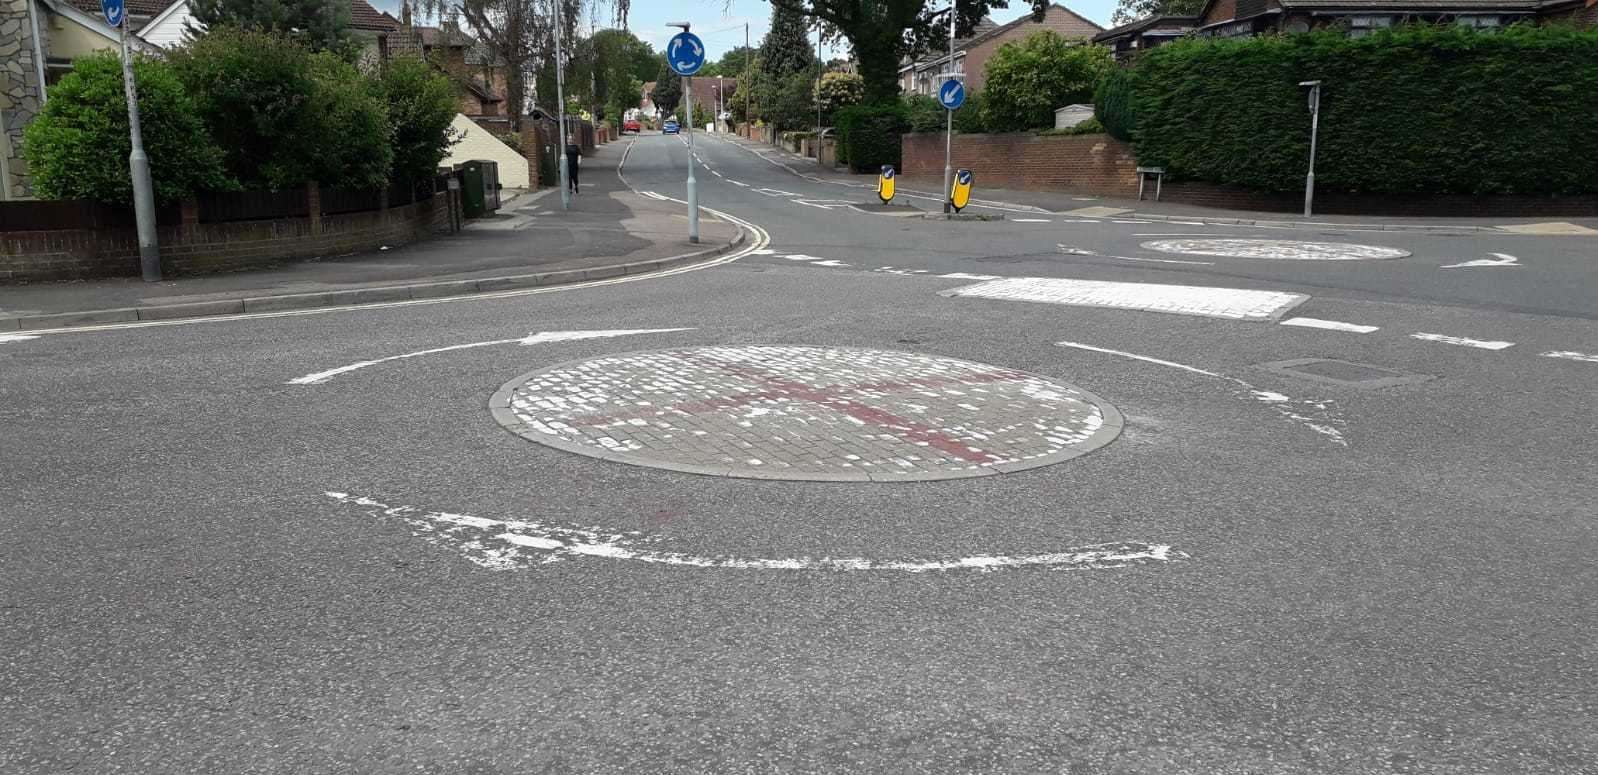 The roundabouts have been painted with a red St George's cross